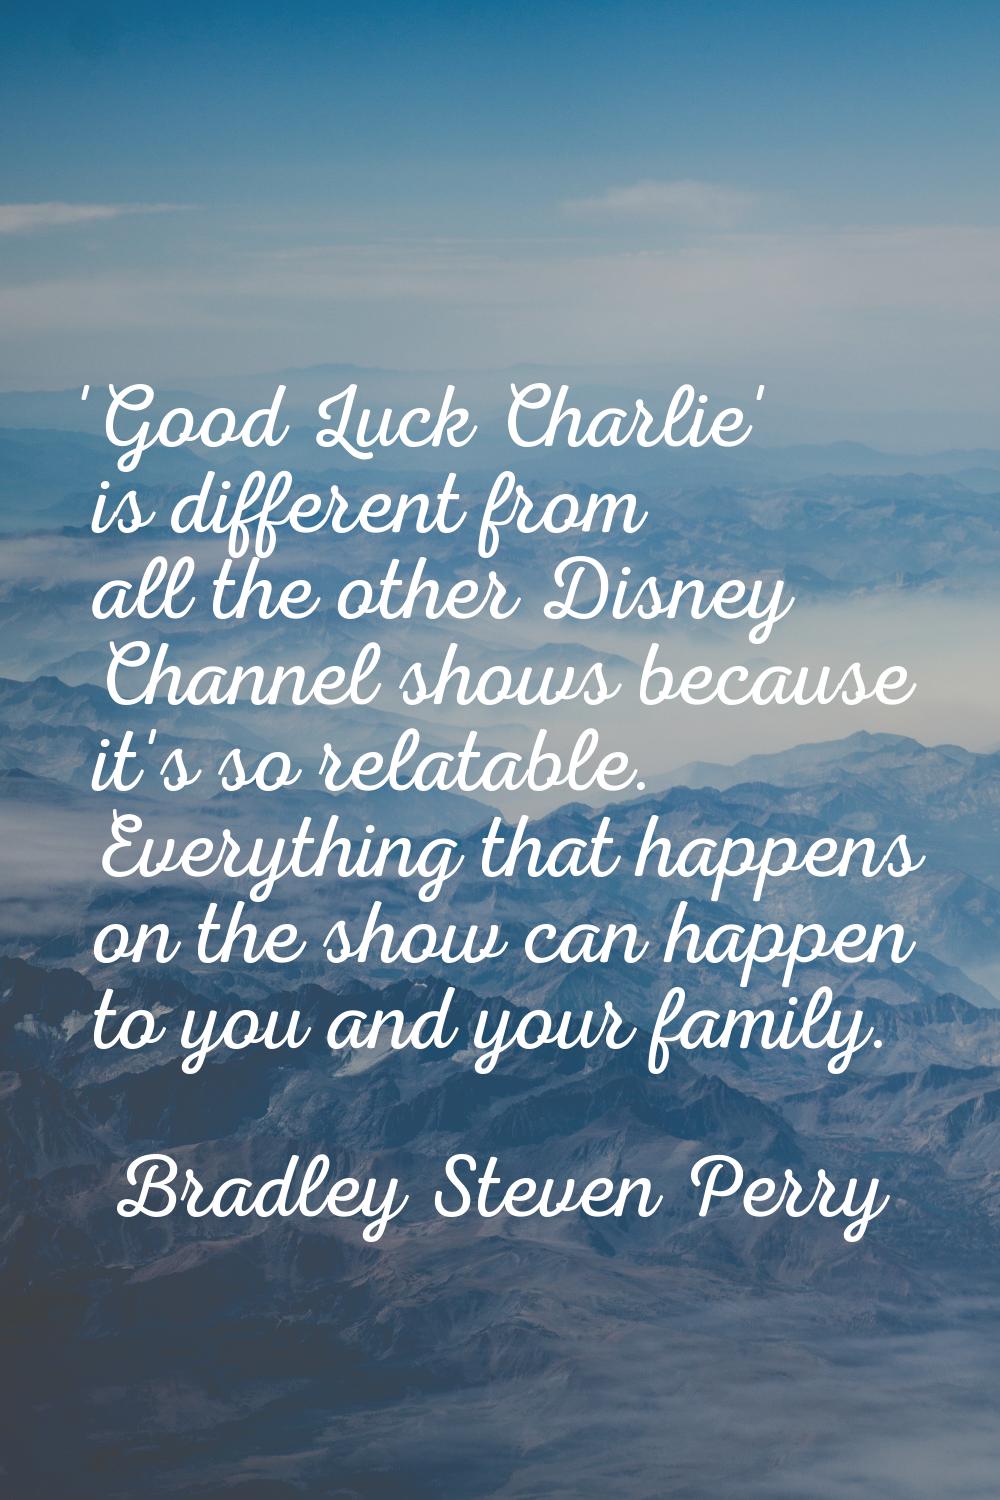 'Good Luck Charlie' is different from all the other Disney Channel shows because it's so relatable.